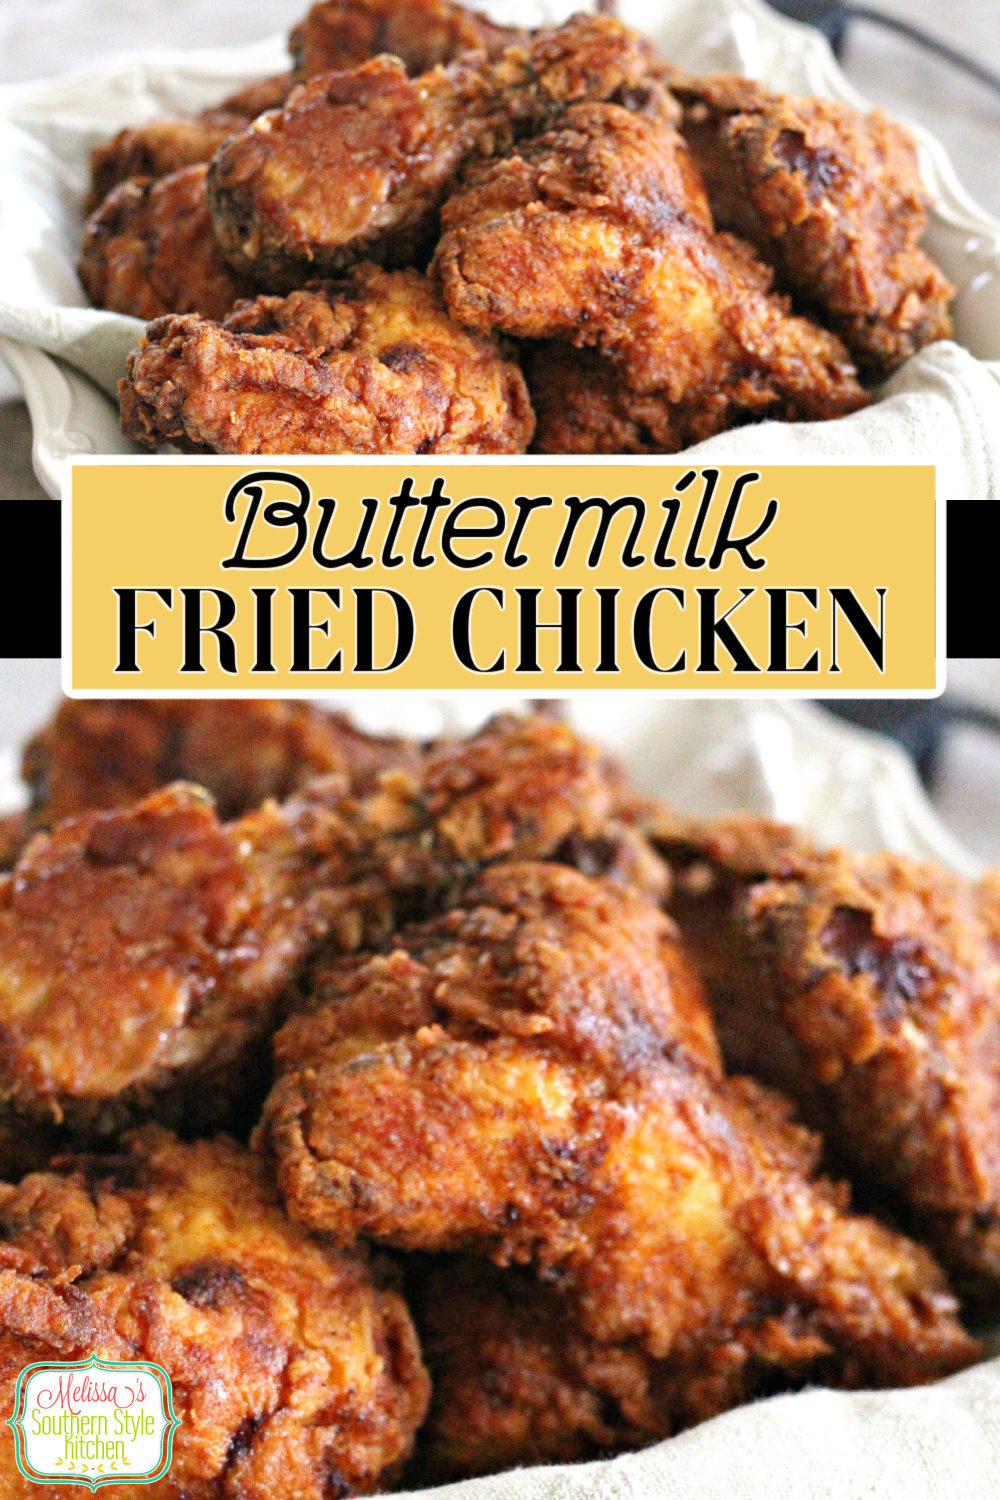 This Southern Buttermilk Fried Chicken recipe is juicy on the inside with a crispy coating that's finger licking good. #friedchicken #buttermilkfriedchicken #friedchickenrecipes #southernfriedchicken #buttermilkfriedchicken #chickenrecipes #dinner #dinnerideas #southernfood #southernrecipes #easyrecipes